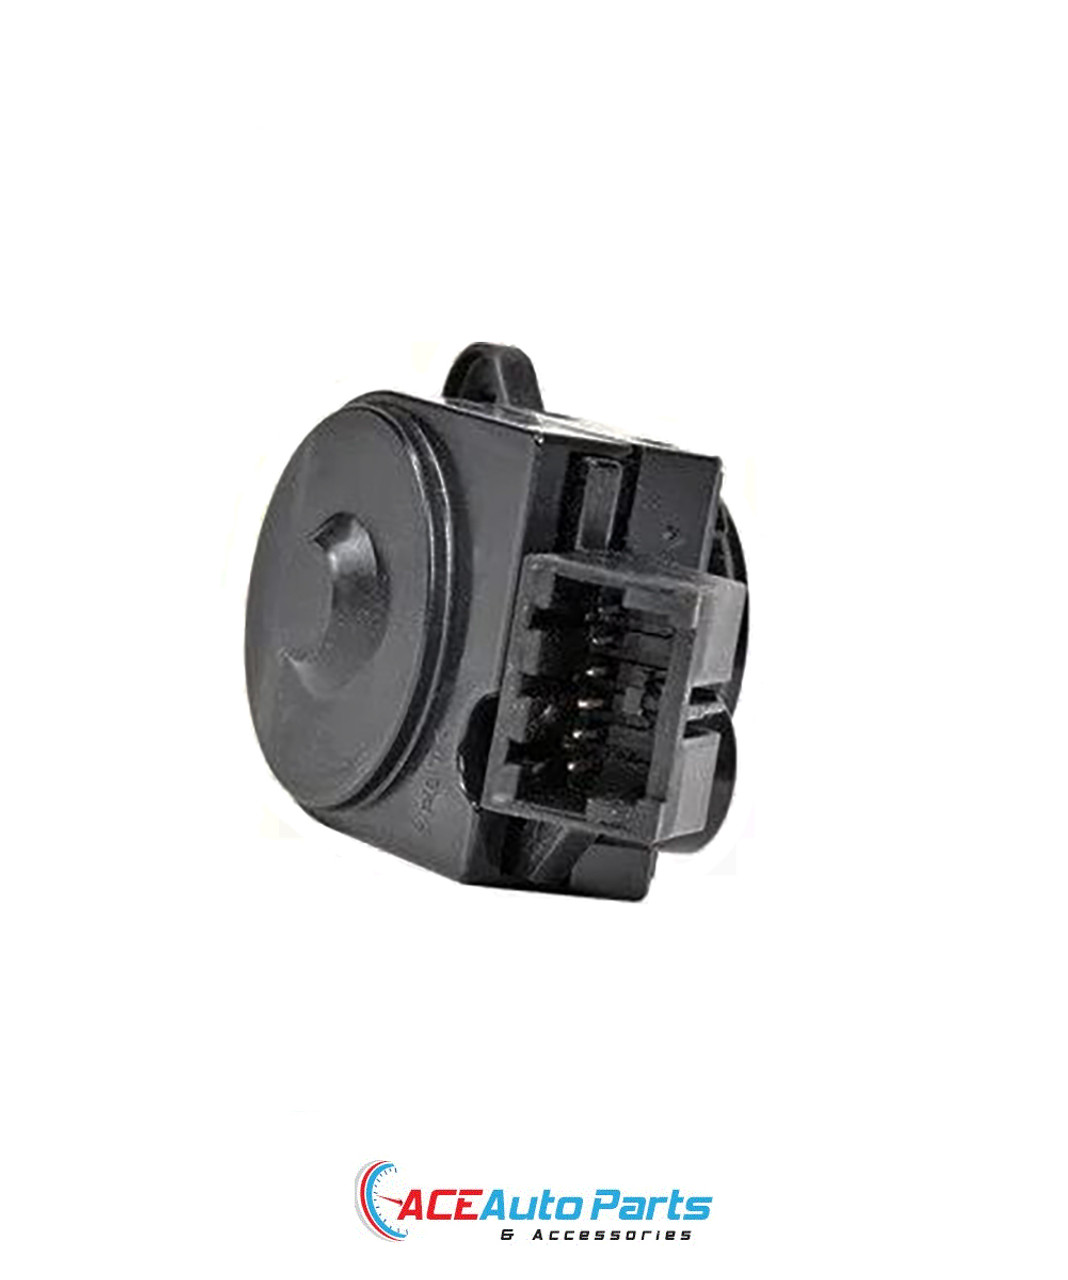 Ignition Switch for Holden Trax TJ, 2013~2020